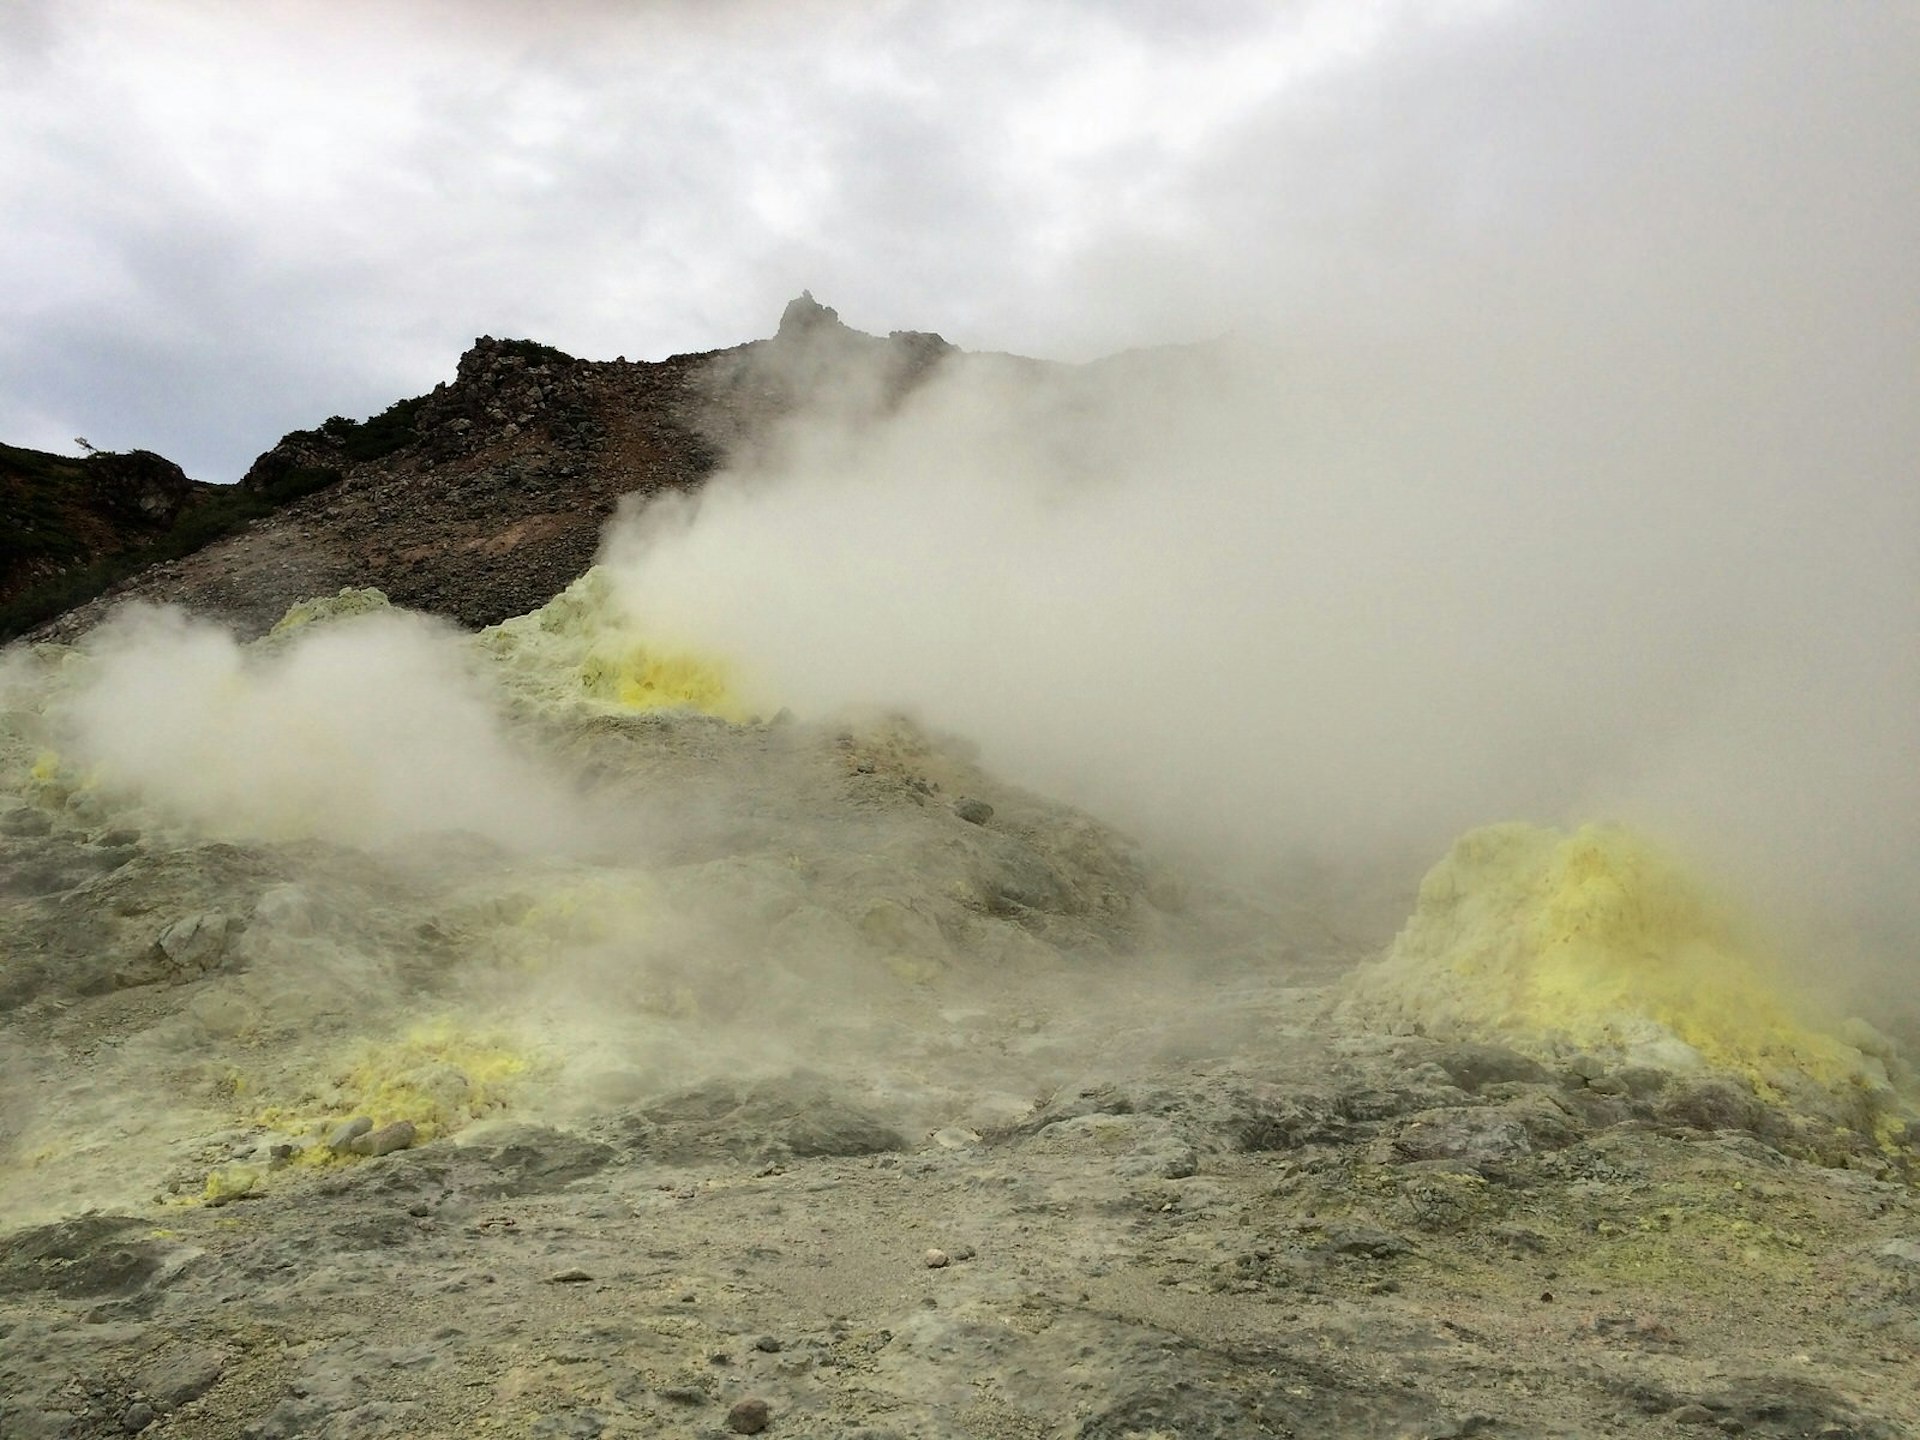 Steam rises out of sulphur-yellow-stained mounds on the slopes of mountain Io-zan